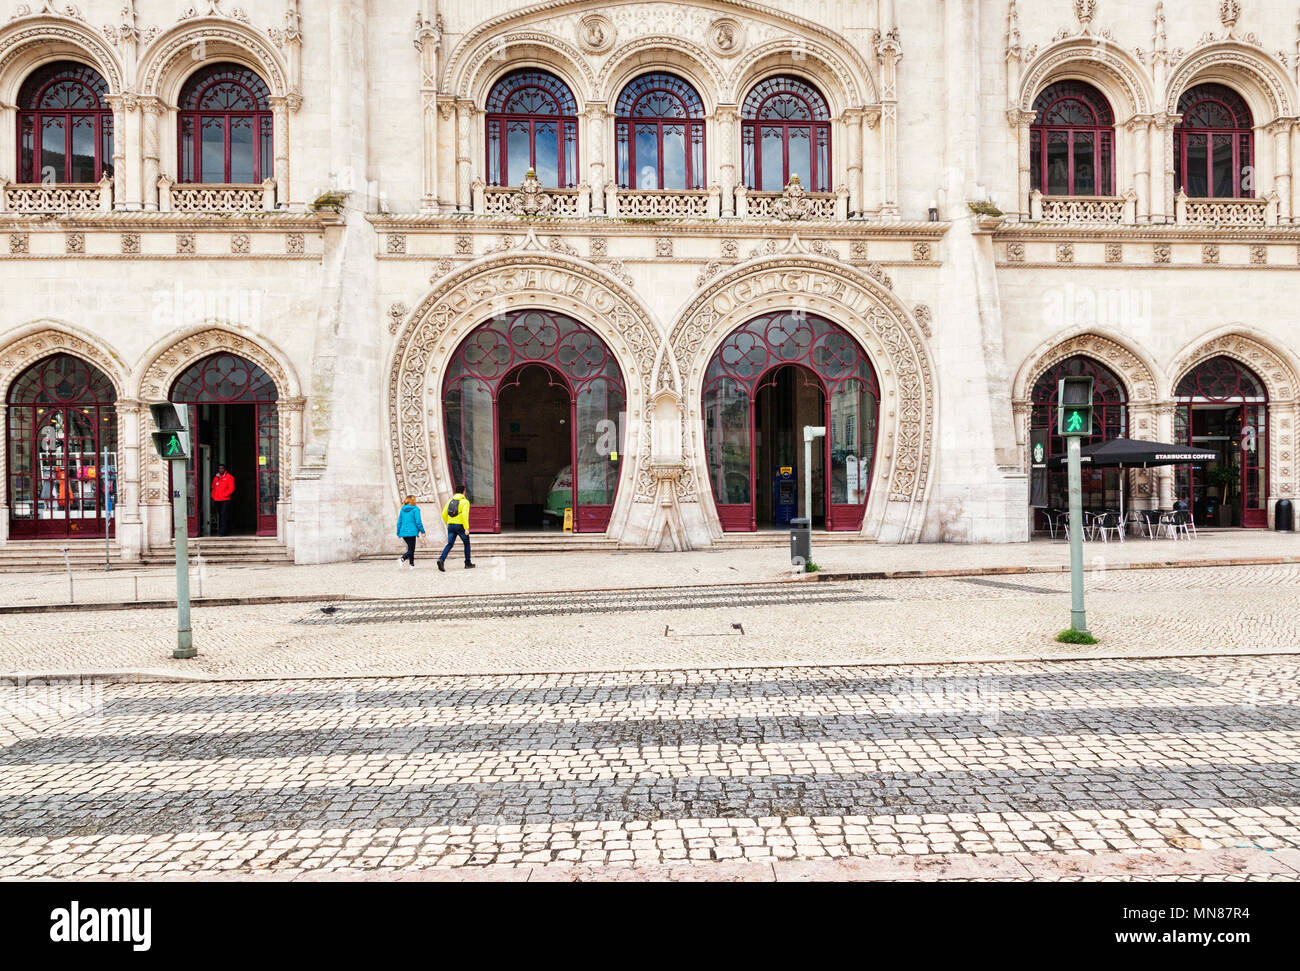 3 March 2018: Lisbon, Portugal - the arched facade of Rossio Railway Station, a couple making their way to the entrance. In the foreground a pelican c Stock Photo